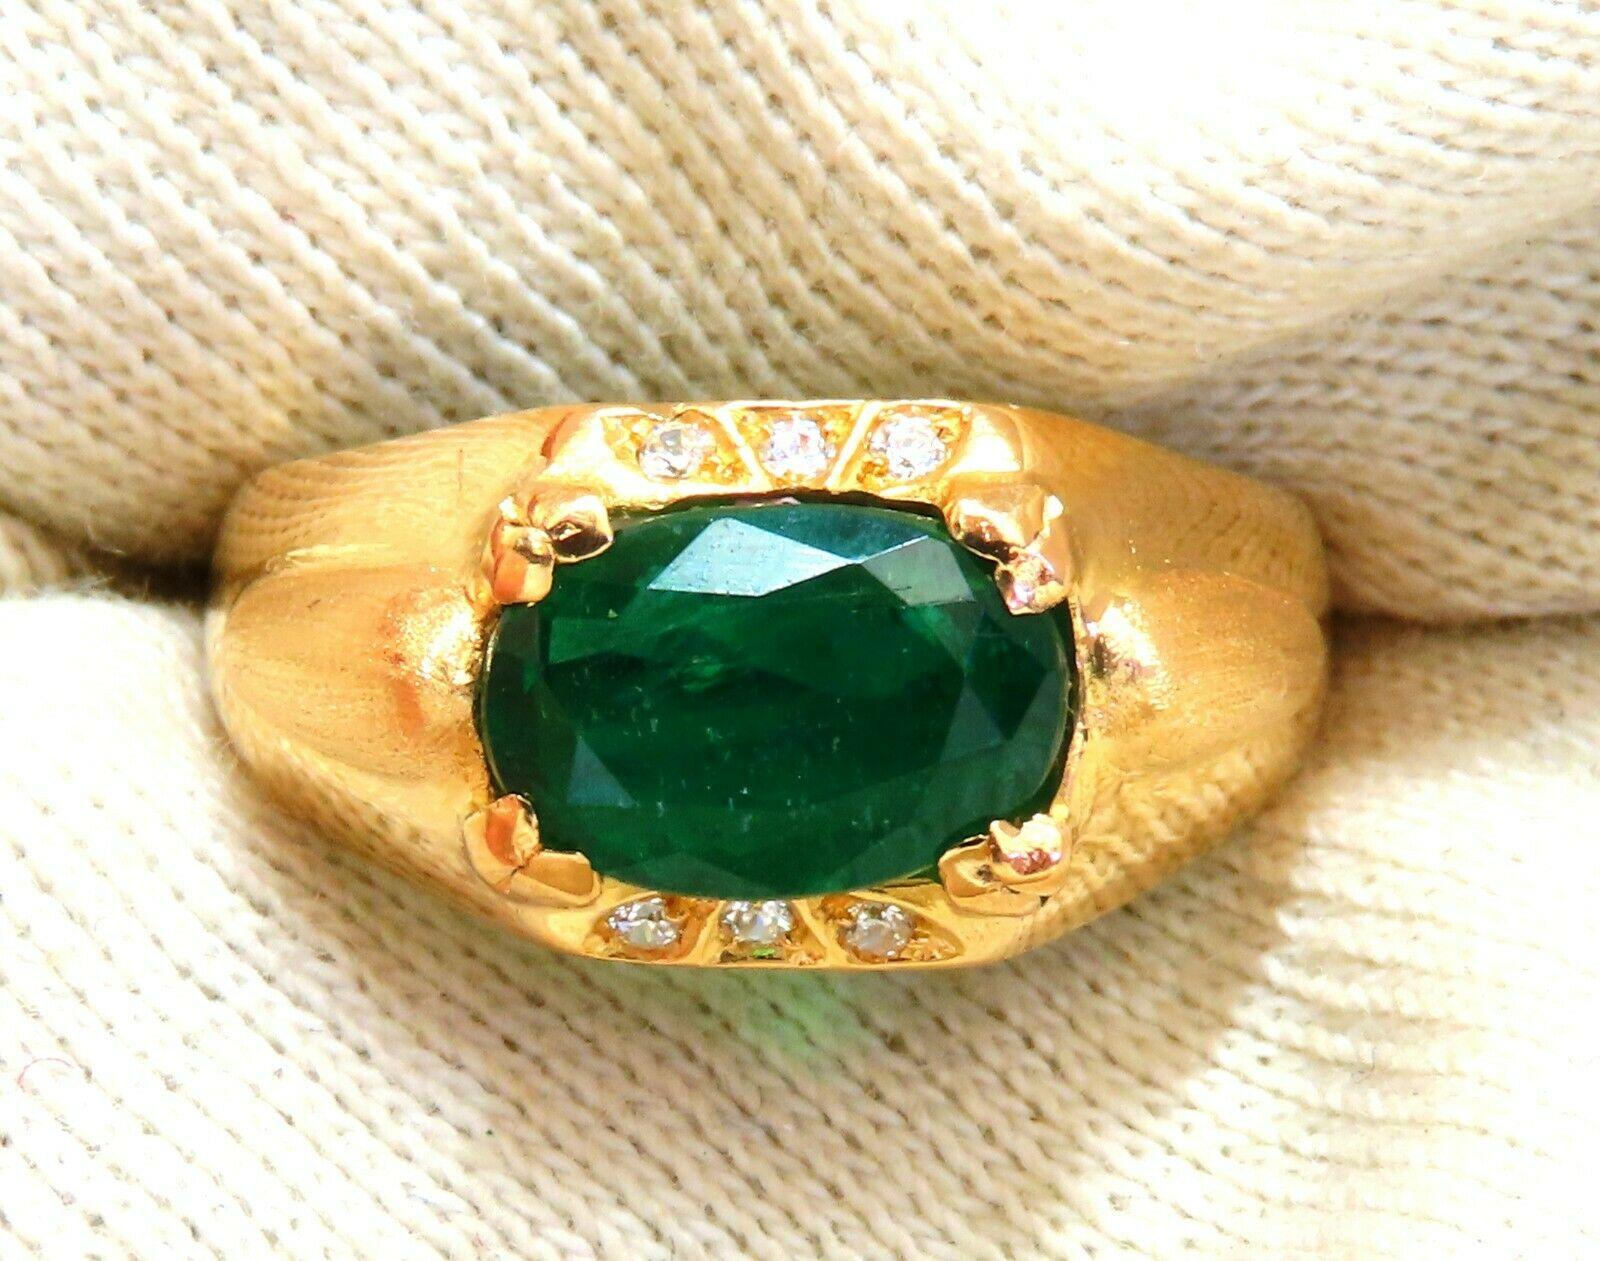 Mens Natural Emerald Ring.

2.80ct. Natural Oval cut, Emerald Ring

Emerald: 10 x 7mm 

Transparent & Vivid Green 

.12ct. Diamonds.

Round & full cuts 

G-color Vs-2 clarity.  

16kt. yellow gold

6.4 grams

Ring Current size: 8

Depth of ring: